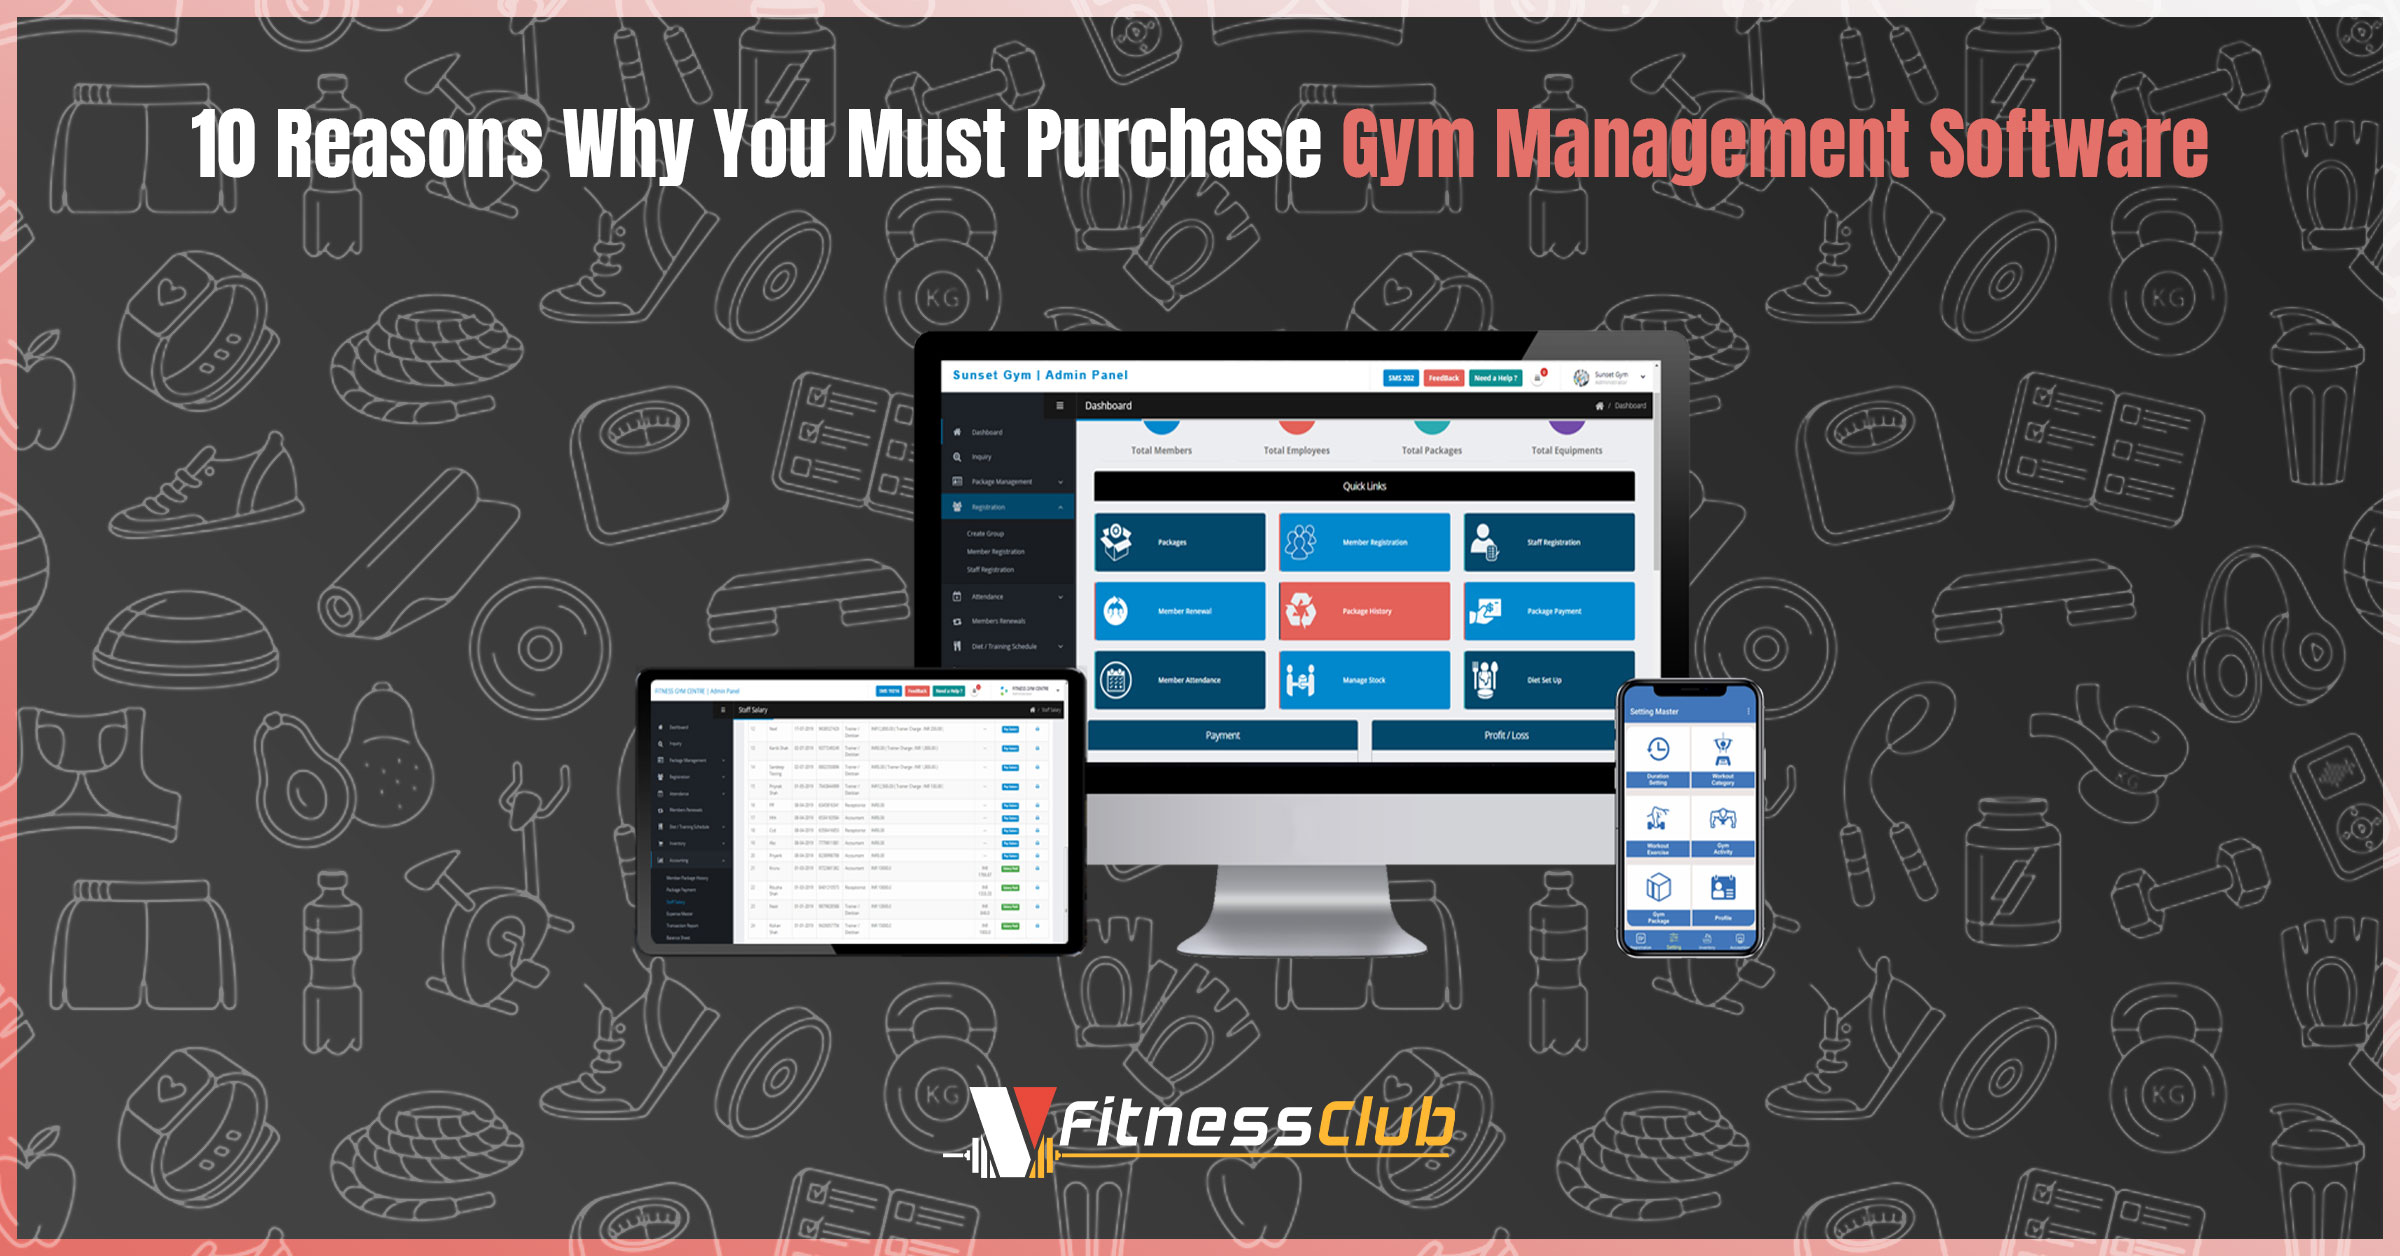 10 Reasons Why You Must Purchase Gym Management Software